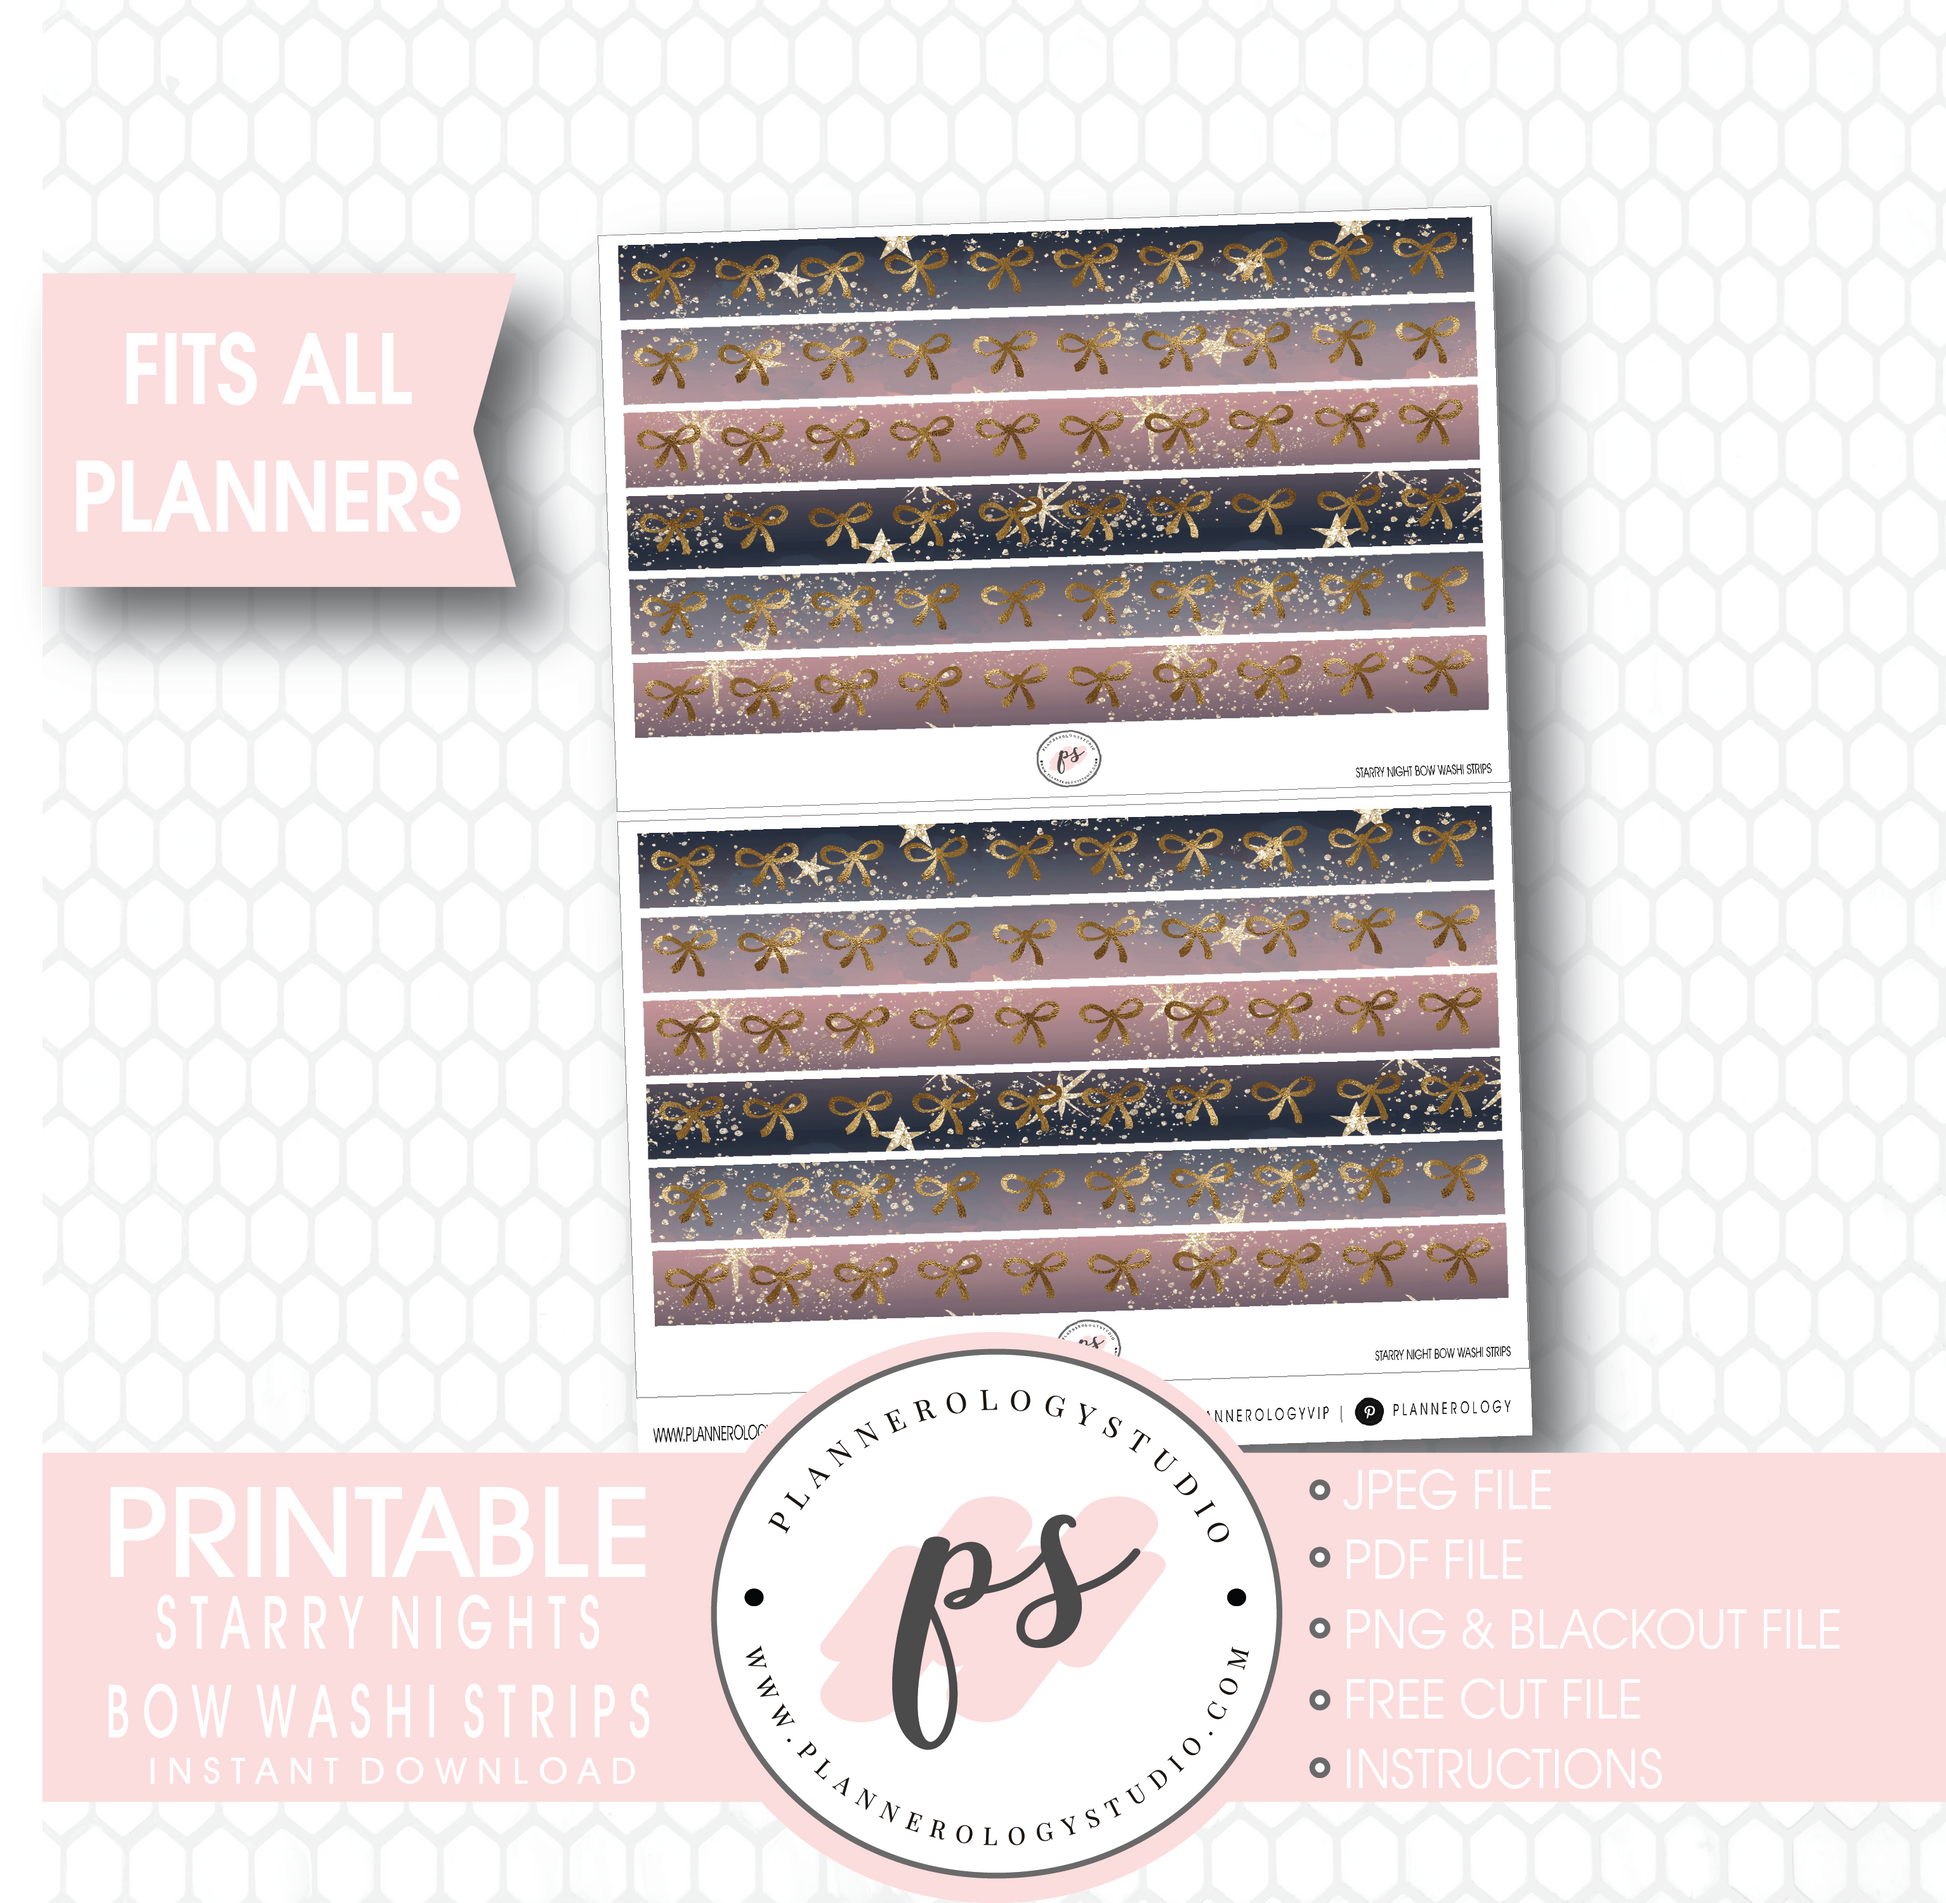 Starry Nights Watercolour Pattern Bow Icon Washi Strip Digital Printable Planner Stickers - Plannerologystudio